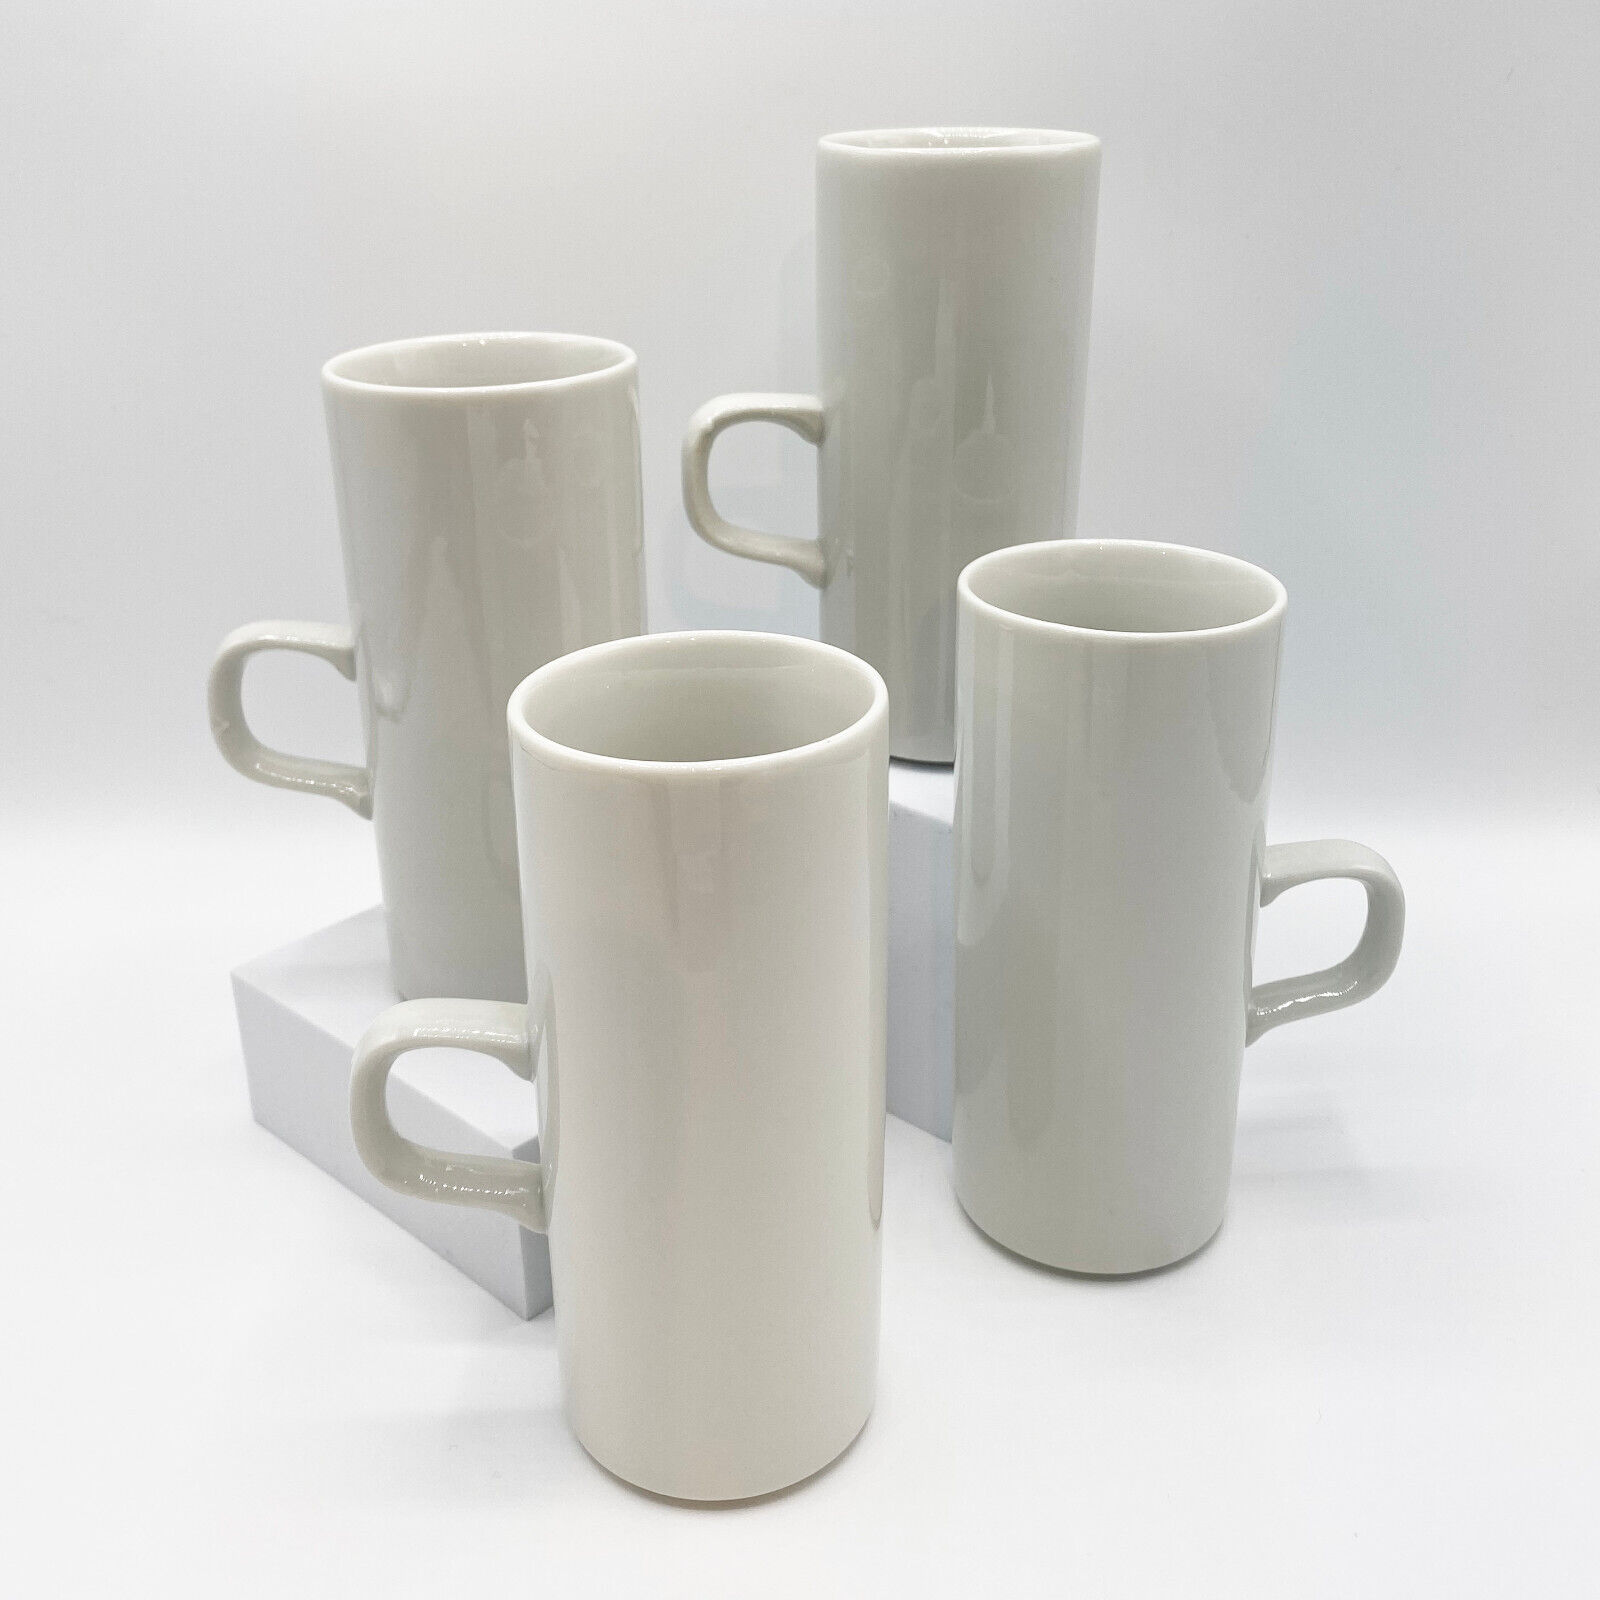 Vintage Set of 4 Tall White Espresso Cordial Mugs with Glossy Finish